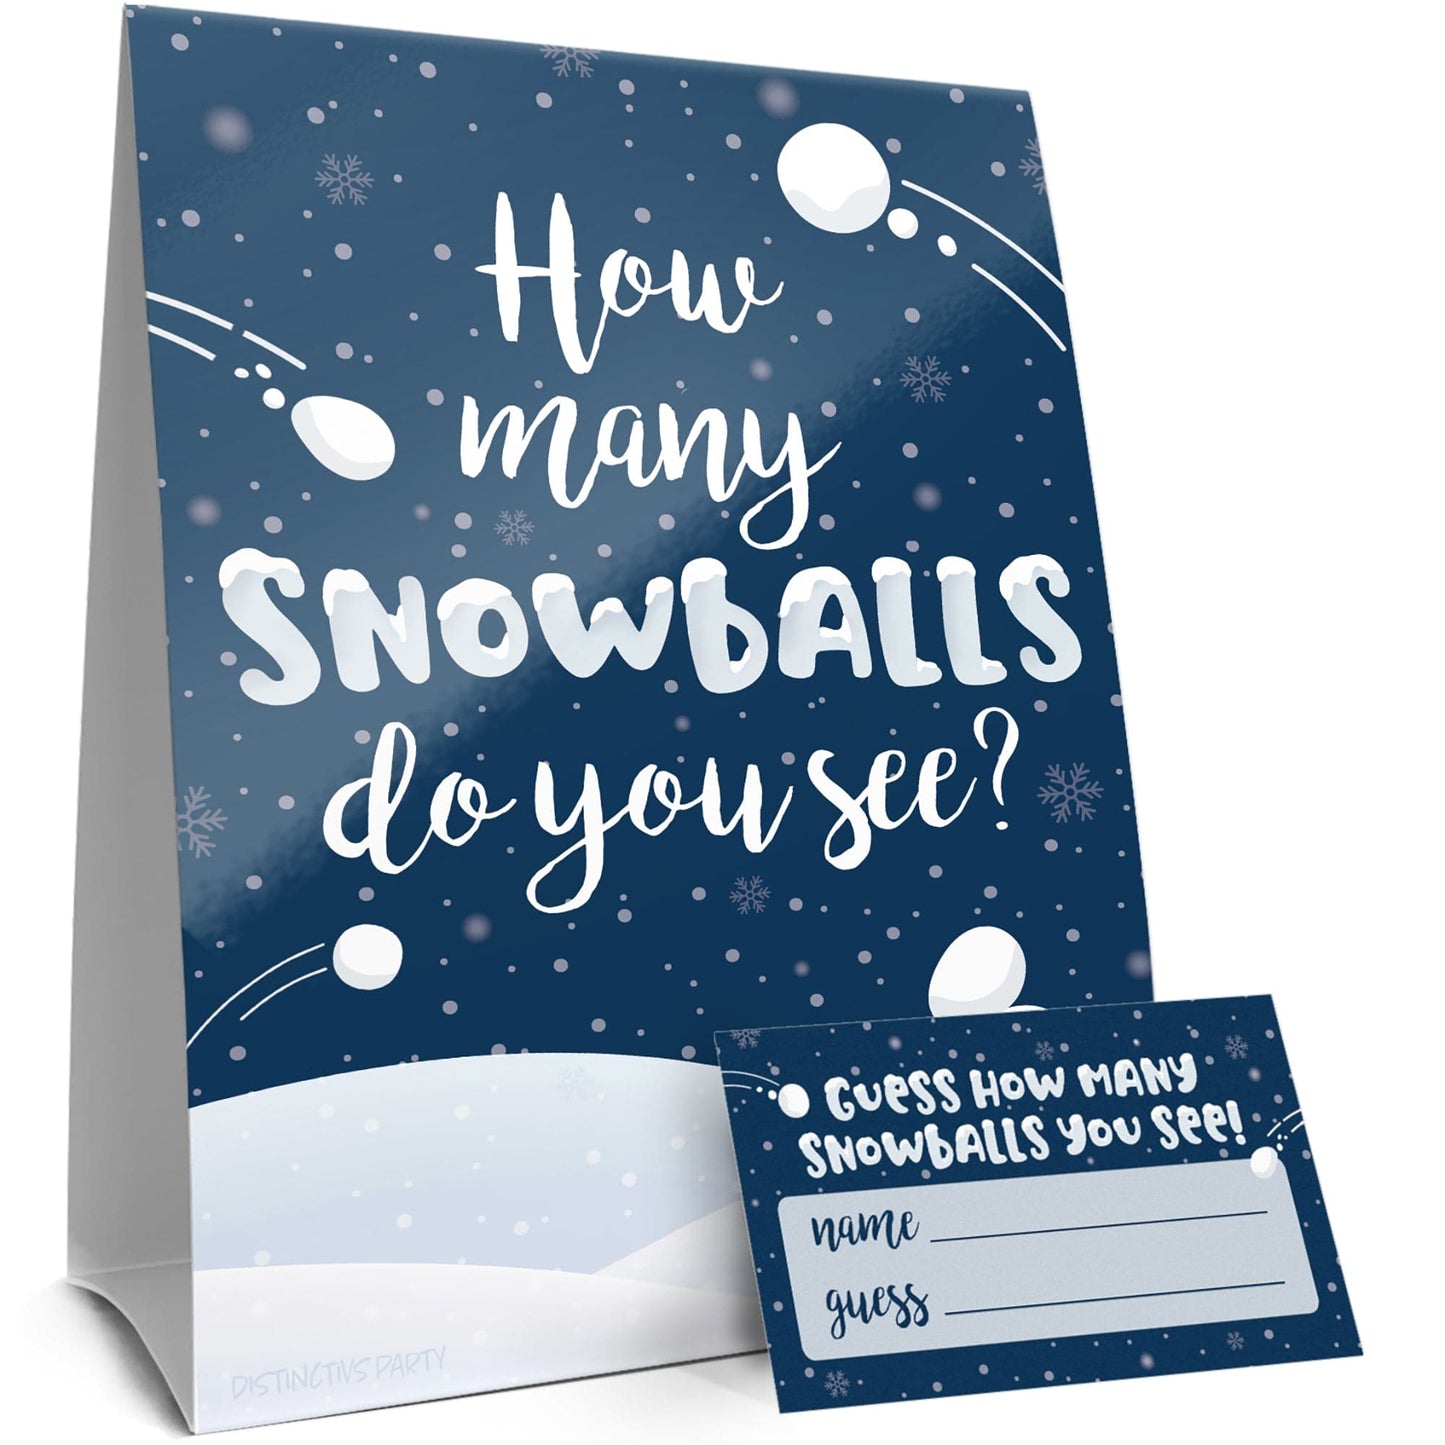 Sign with Cards Winter Holiday Party Games - How Many Snowballs Holiday Guessing Game